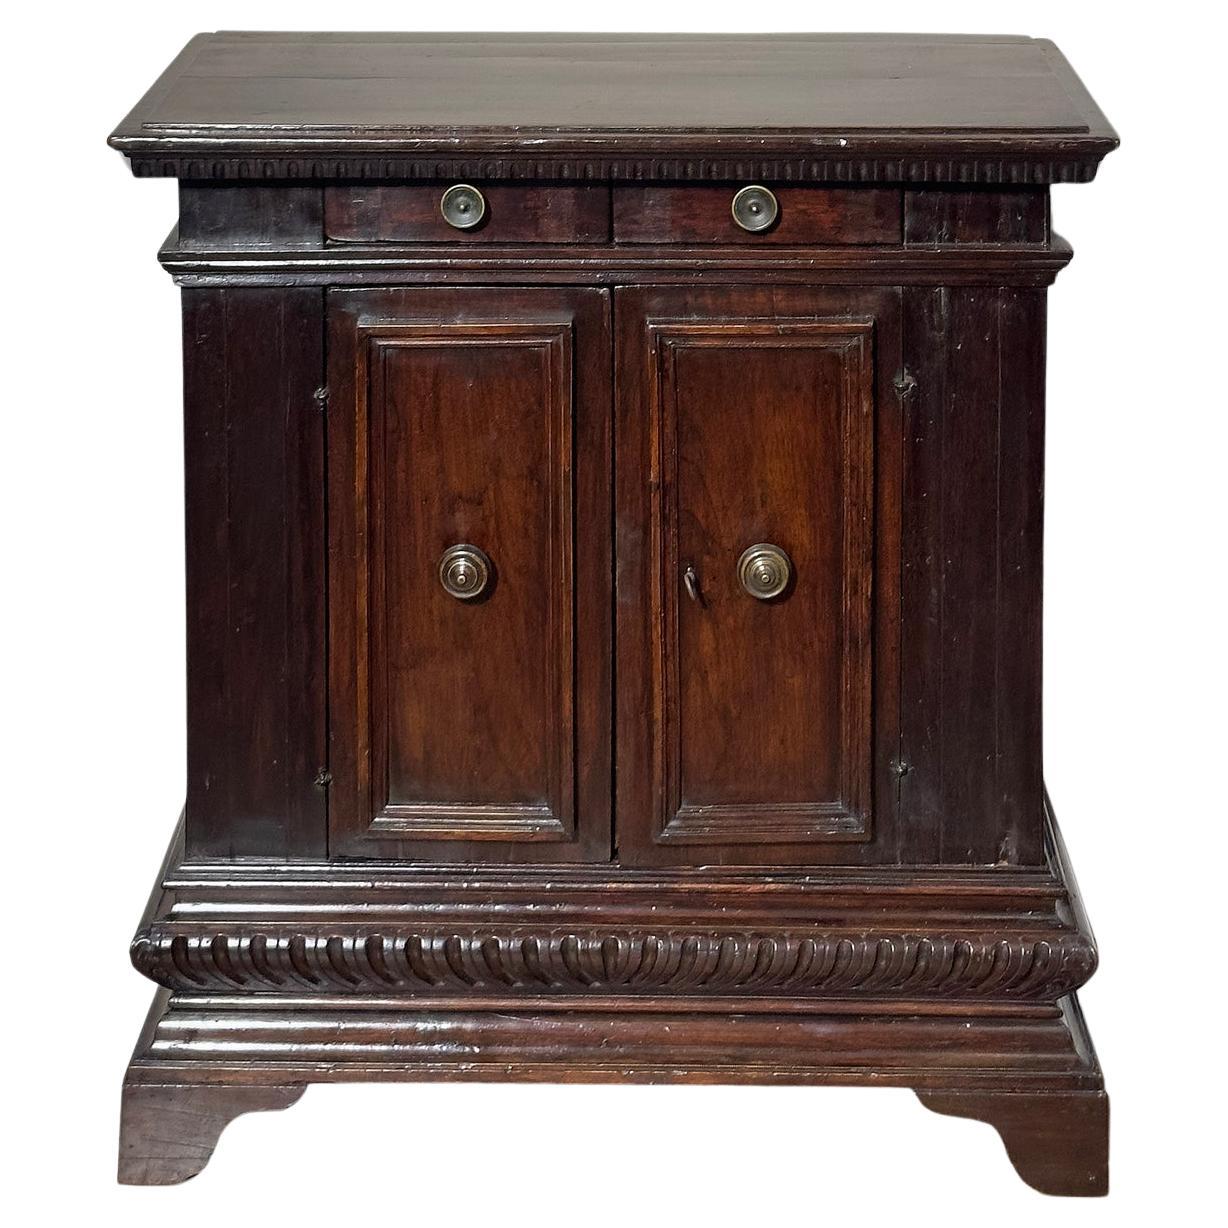 16th CENTURY RENAISSANCE SMALL SIDEBOARD IN SOLID WALNUT For Sale